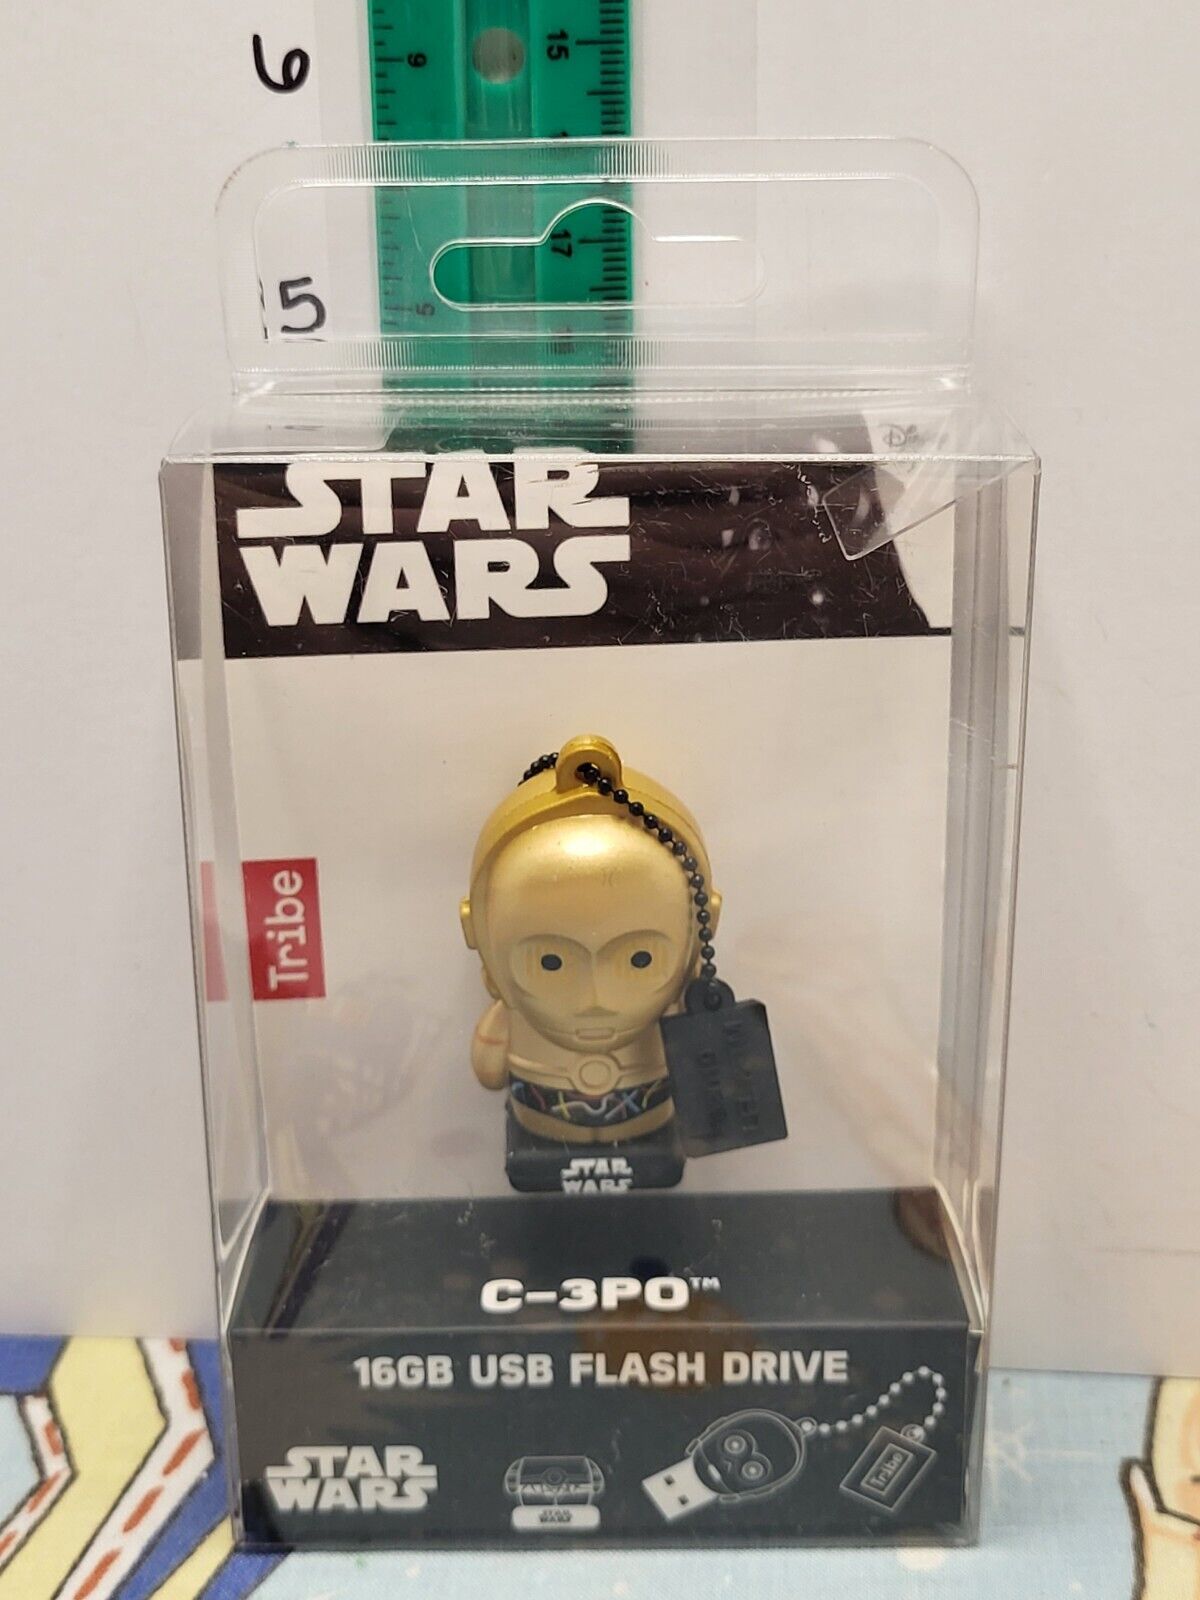 Star Wars Disney C-3PO 16GB USB Flash Drive by Tribe - NEW IN PACKAGE